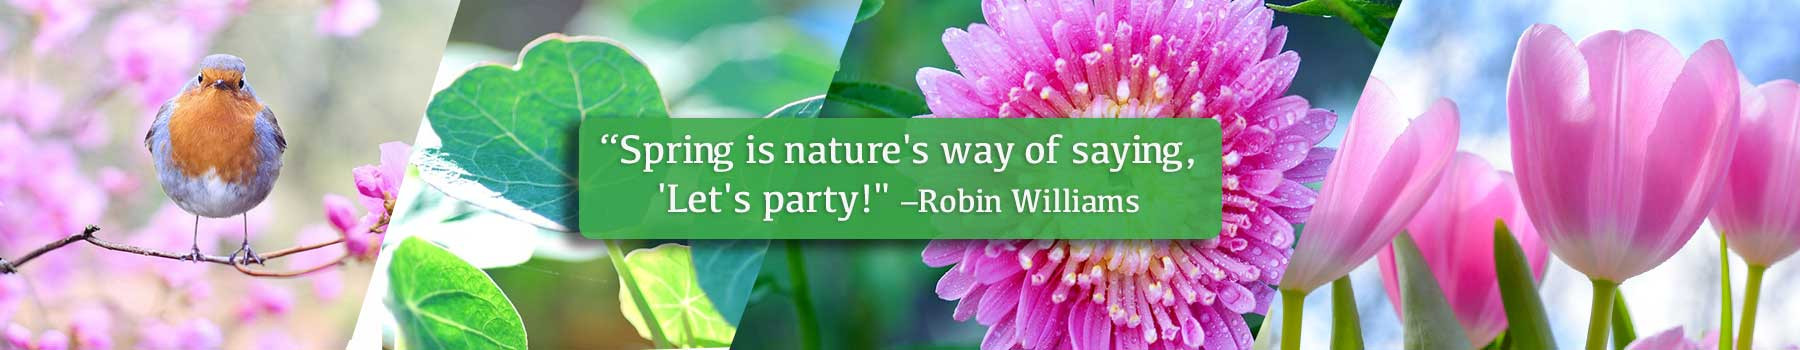 Spring is Natures Way of Saying 'Let's Party!' - Robin Williams